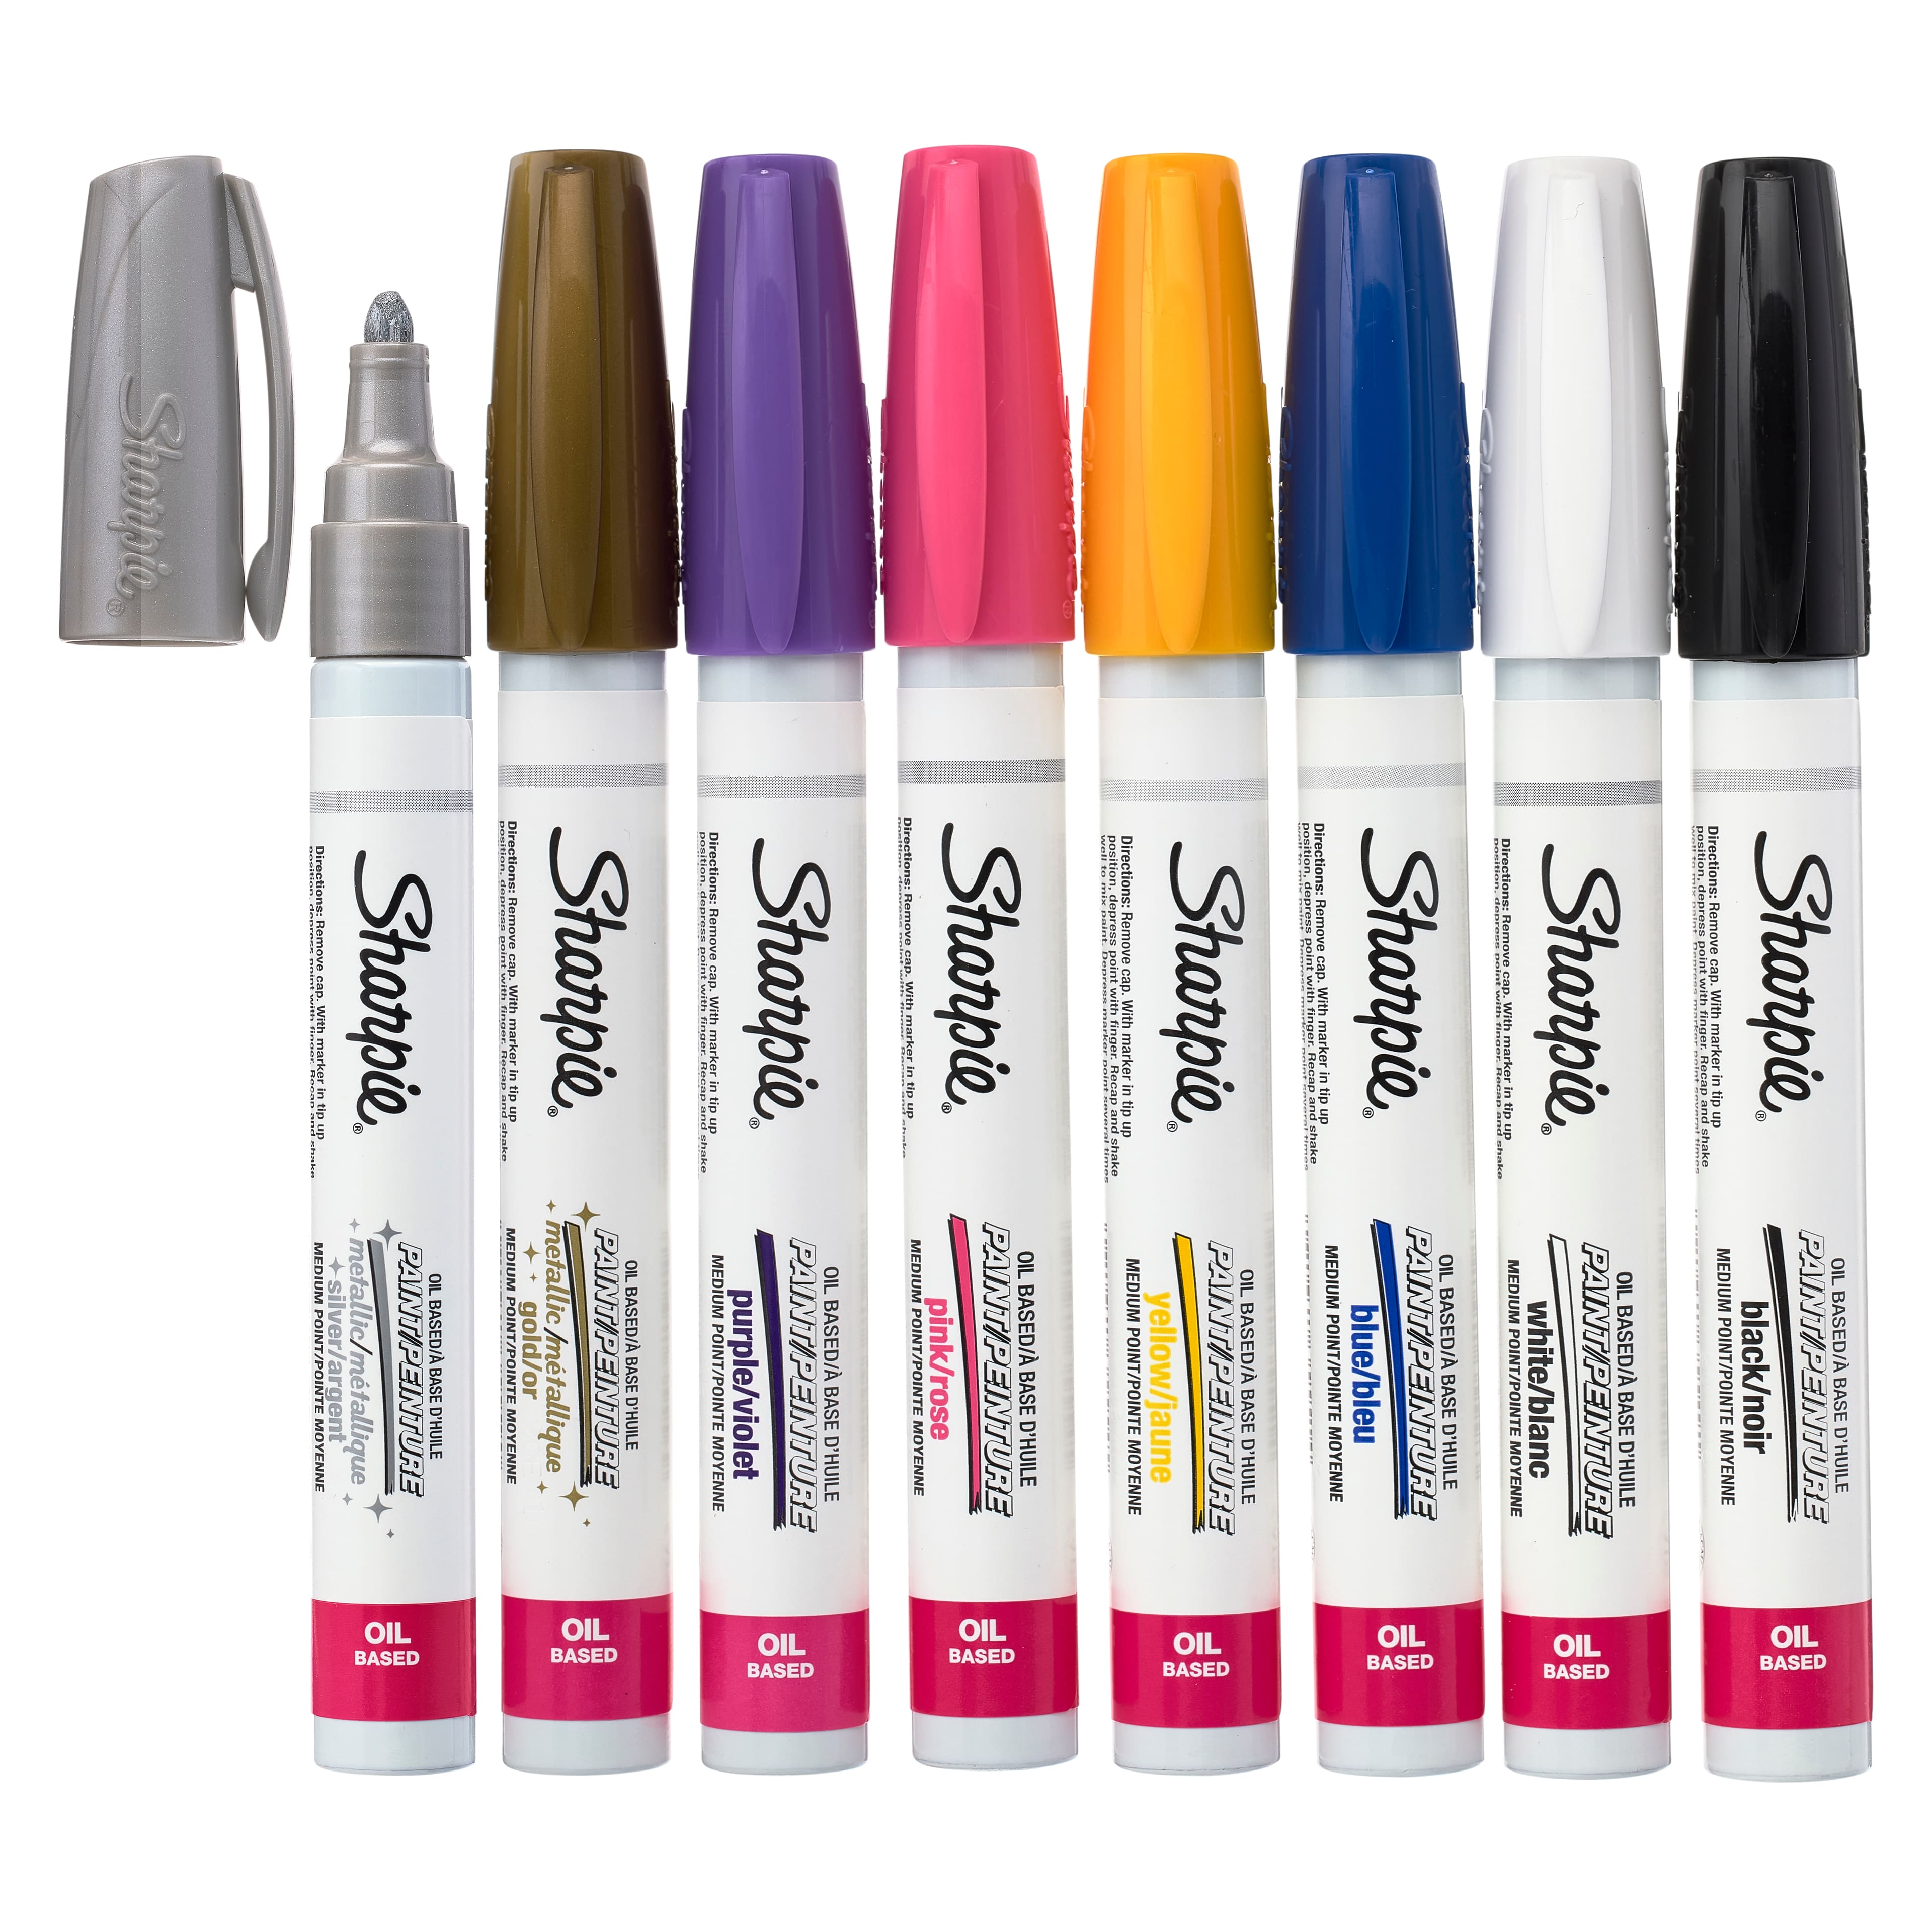 Sharpie Oil-Based Paint Markers, Fine Point, Bright Colors, 5 Count 